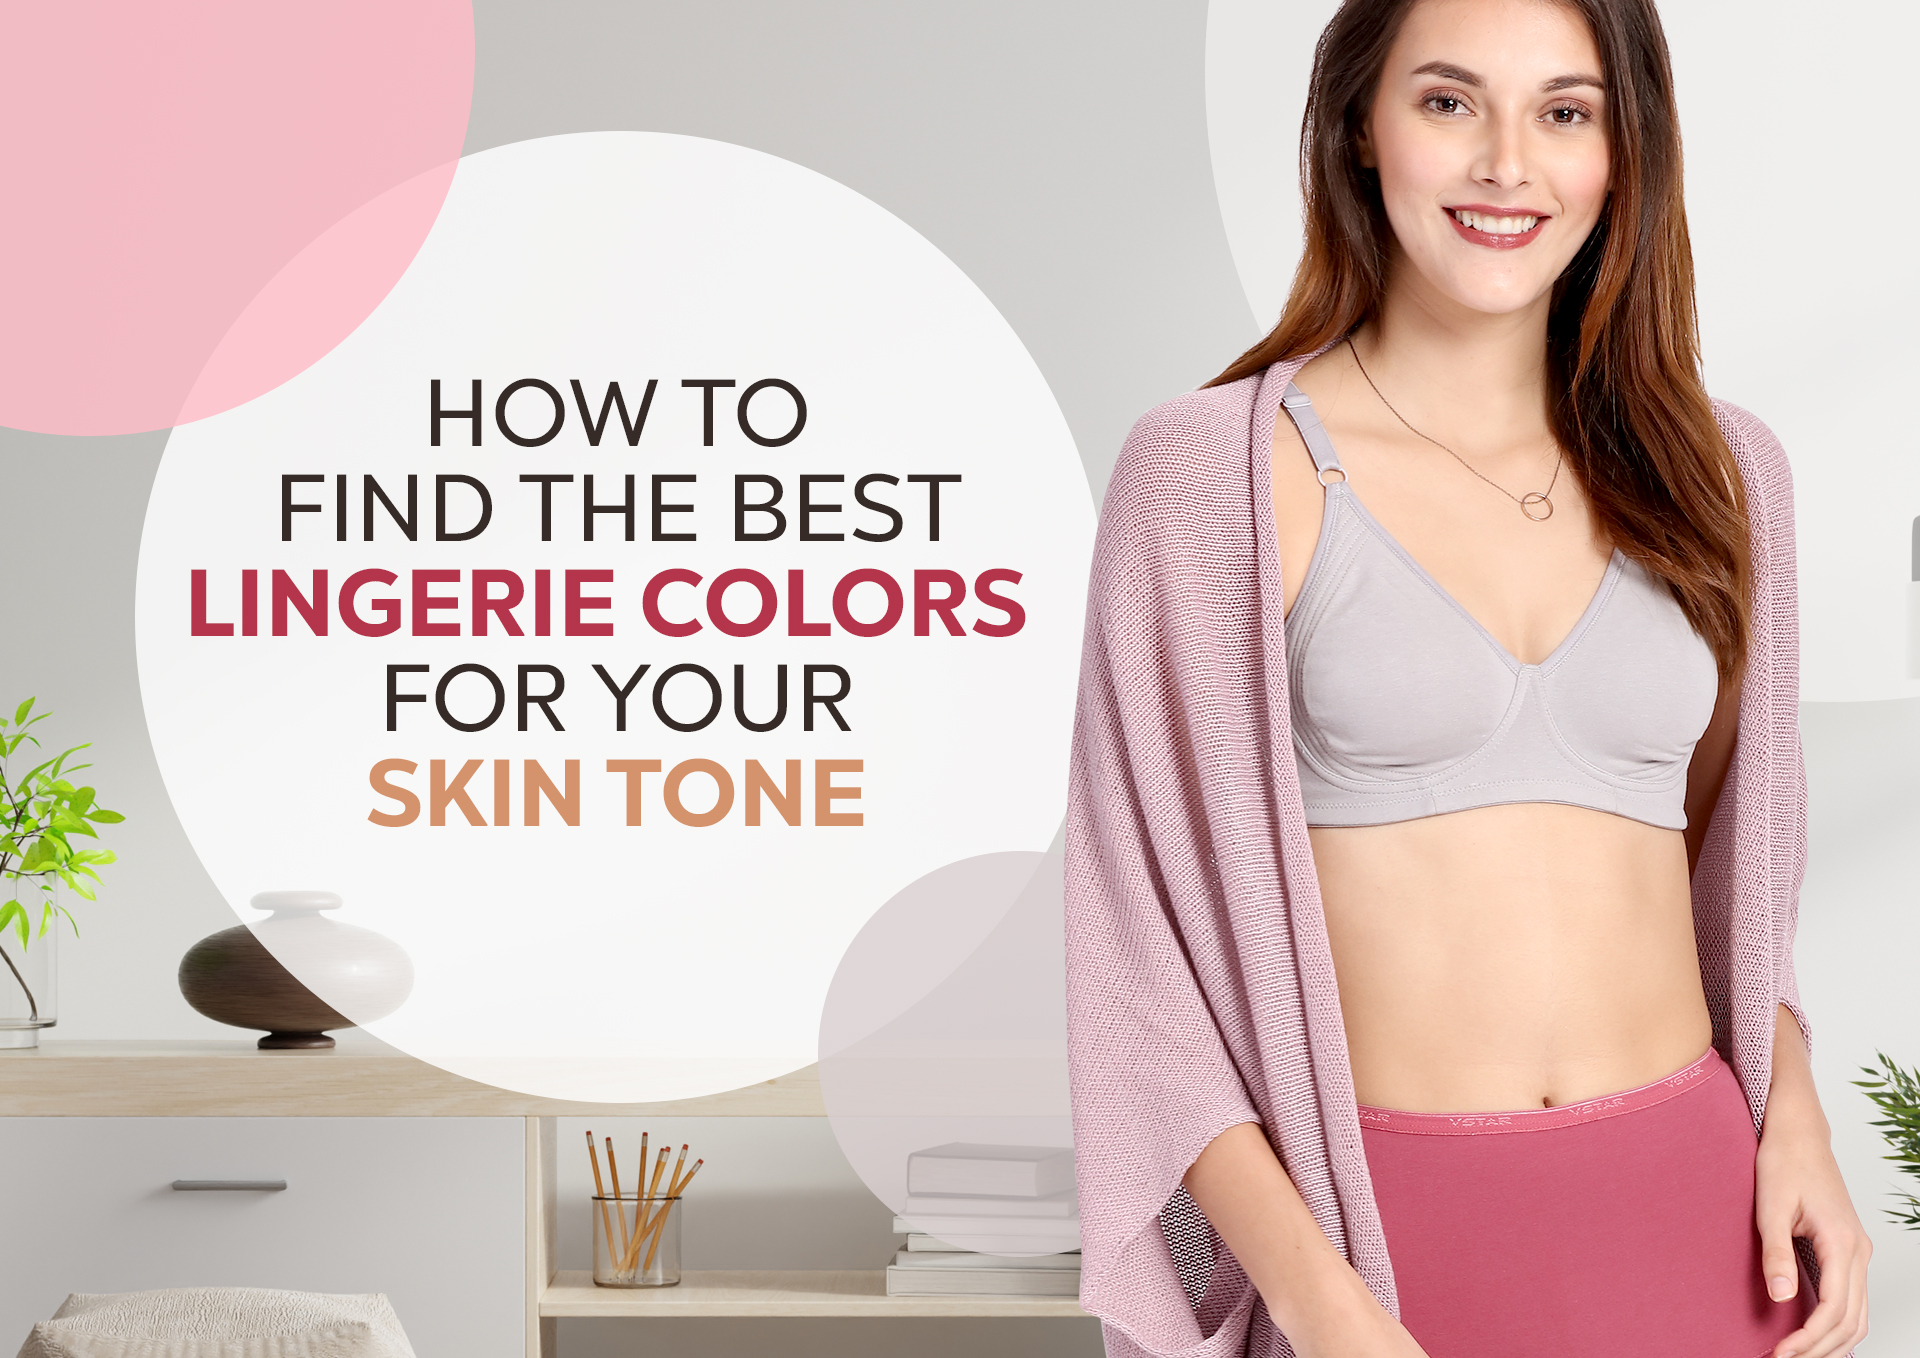 Choose the right T-shirt Bra for your style and comfort - Blog